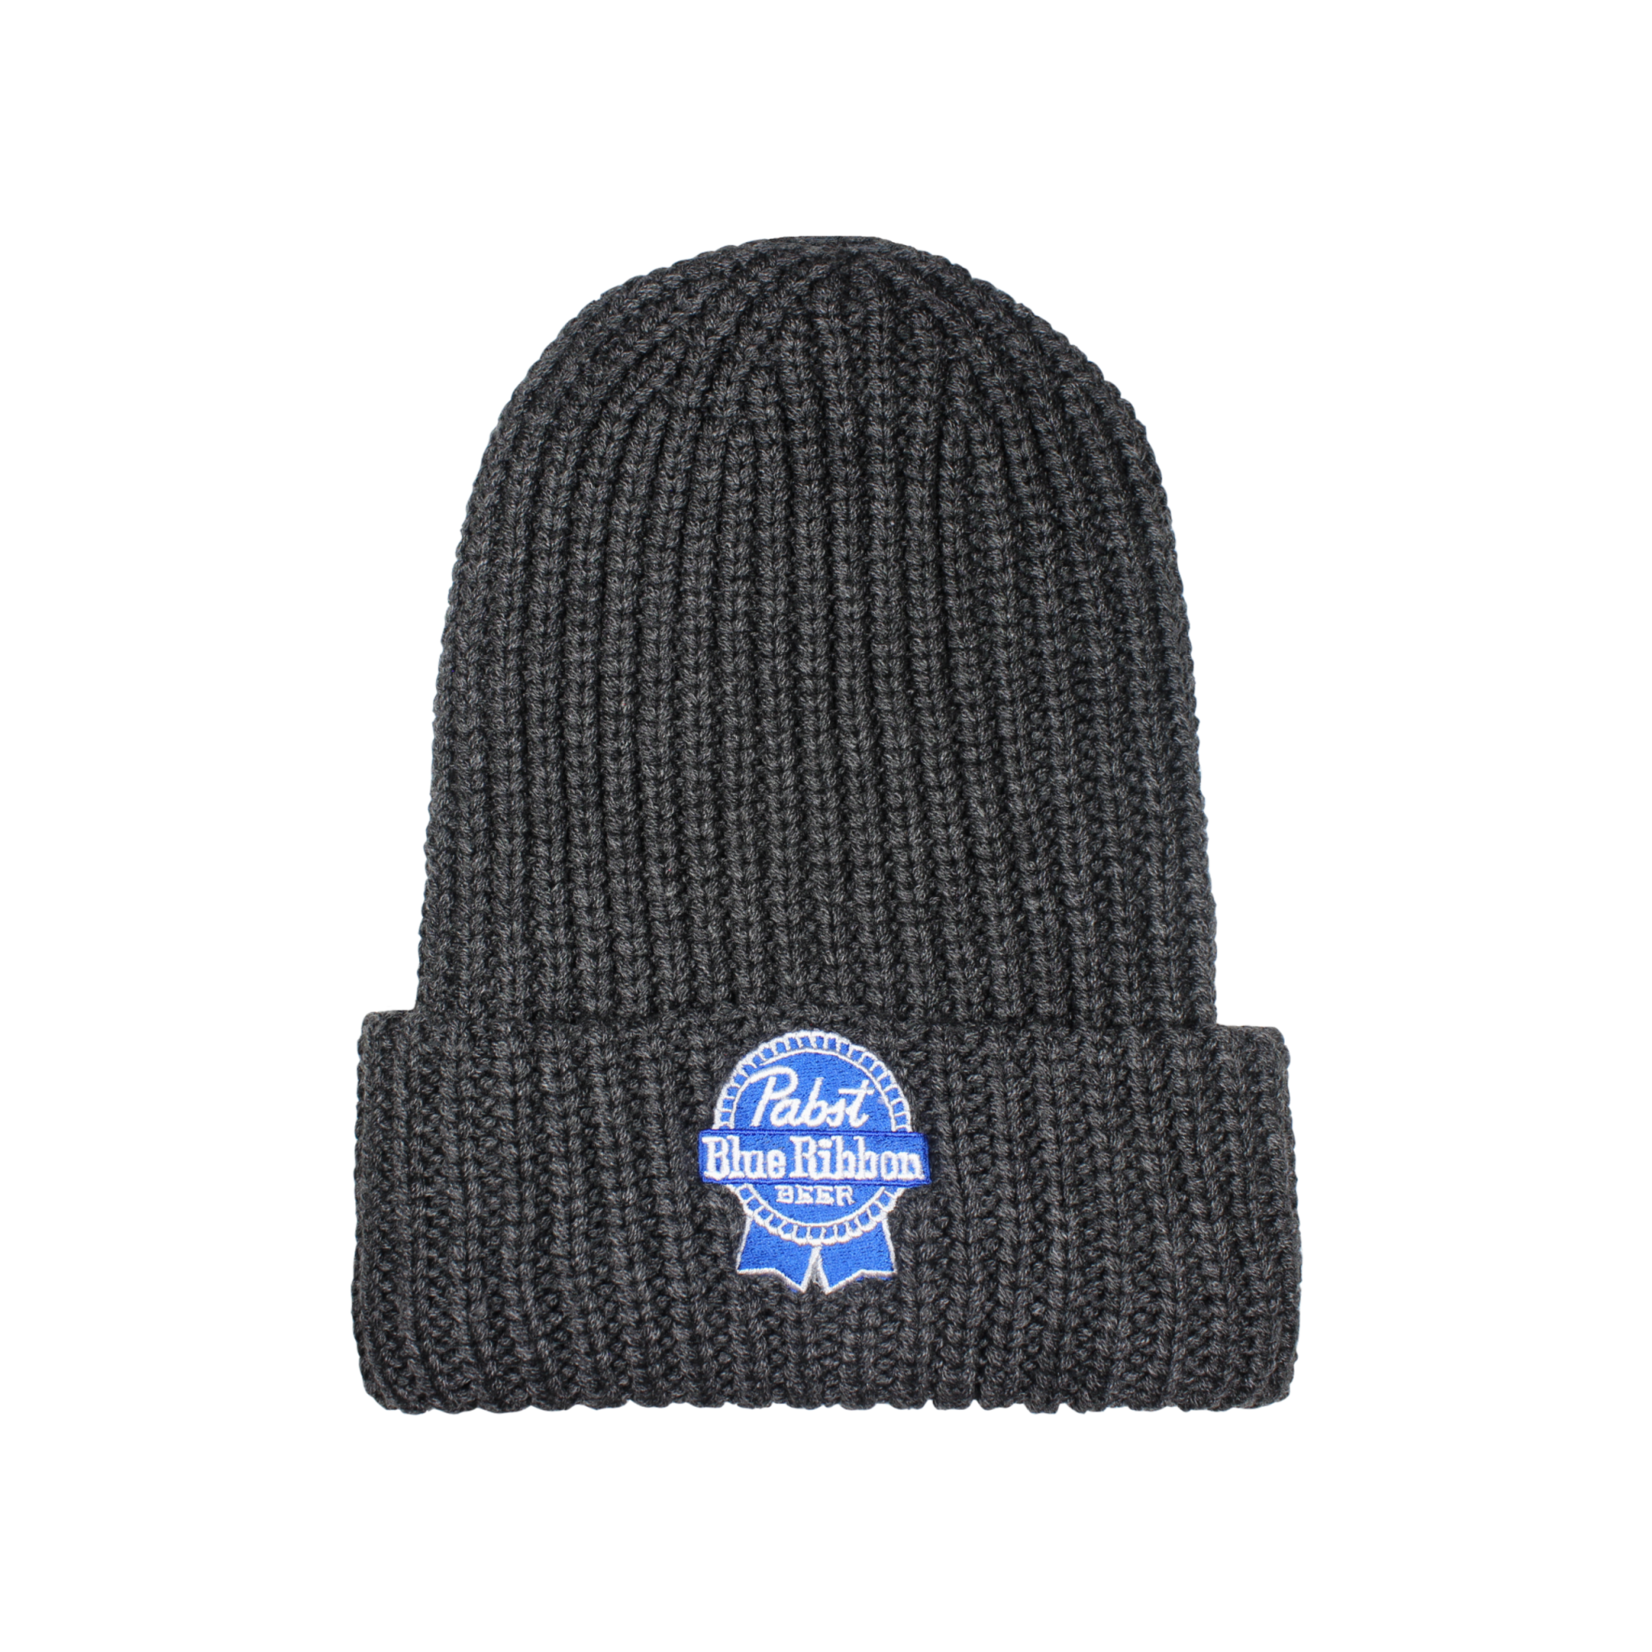 Pabst Pabst Ribbon Charcoal Chunky Knit Cuffed Beanie